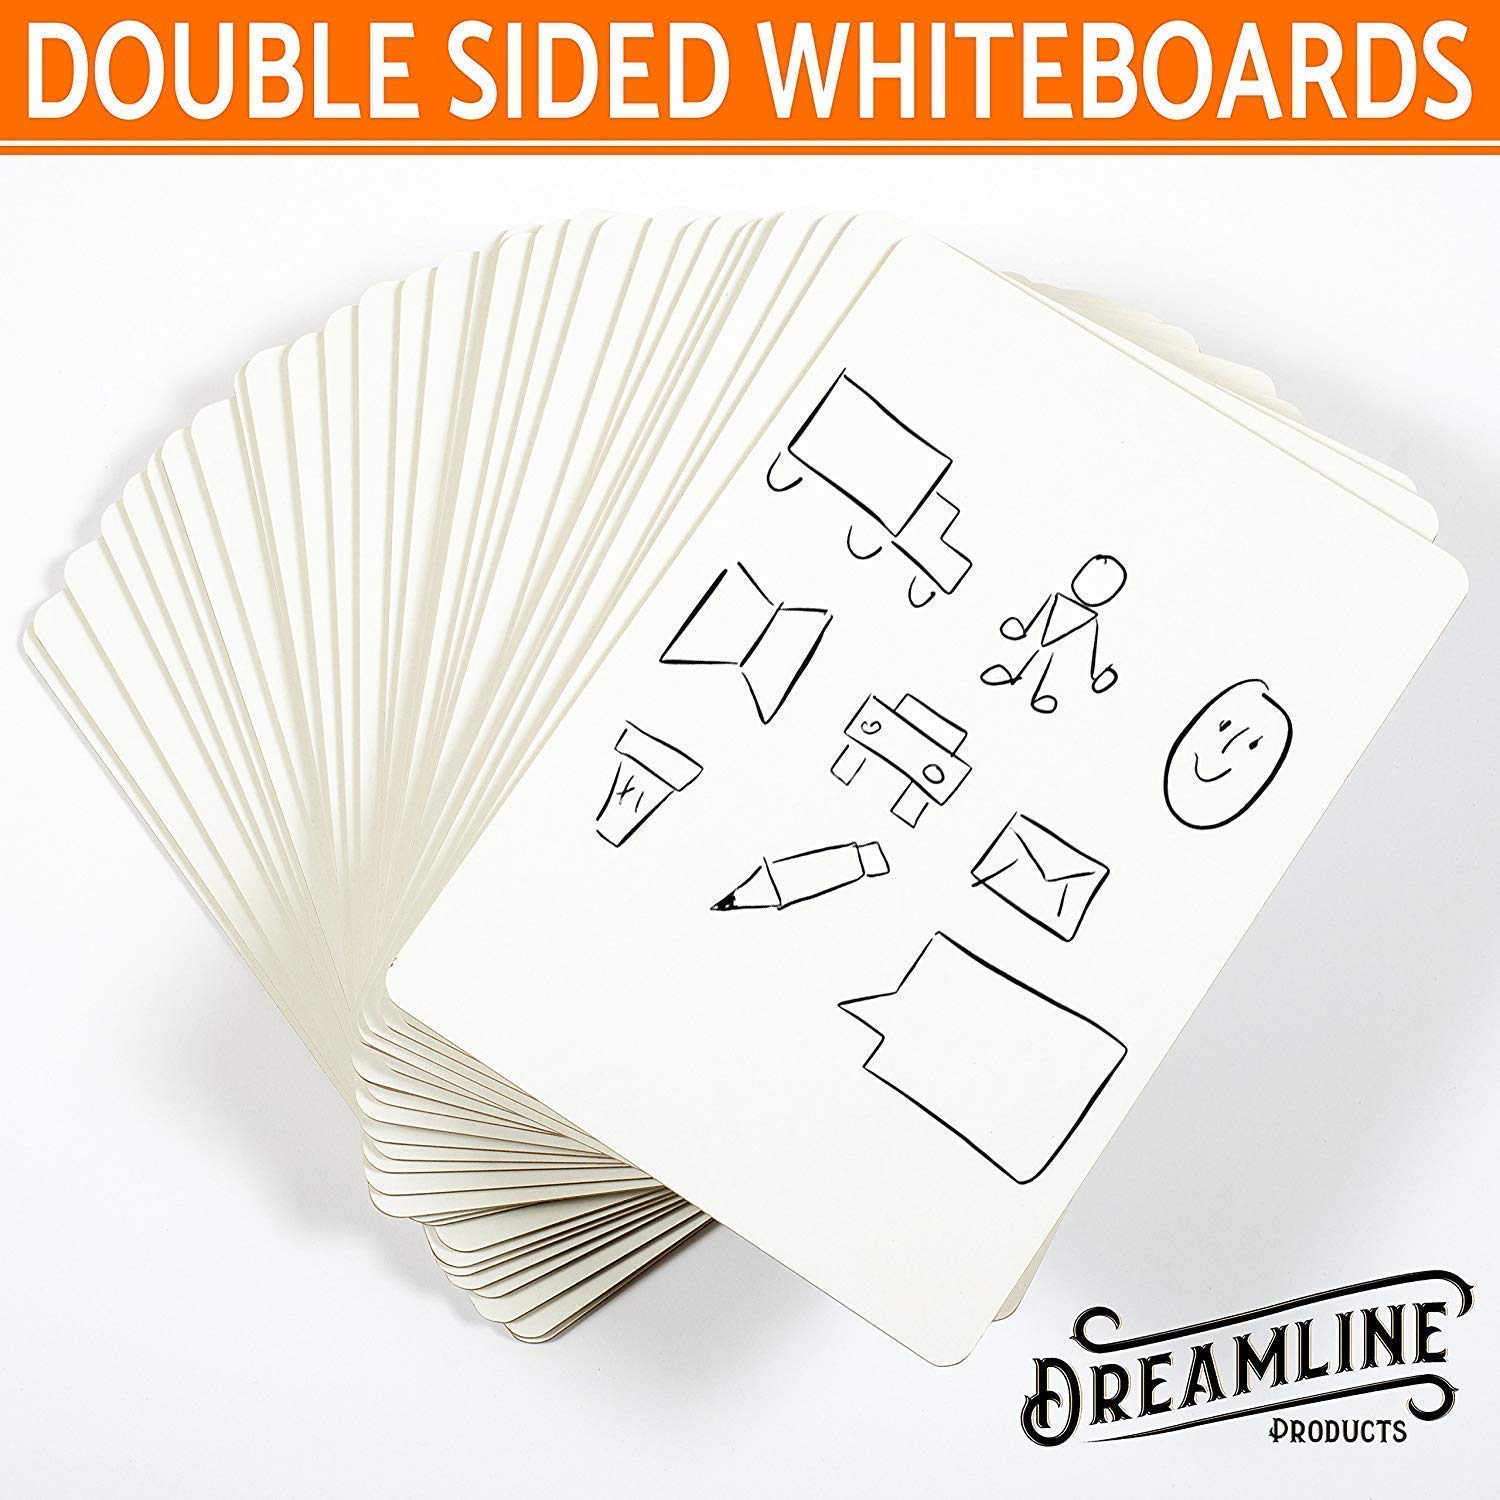 DreamLine Products Dry Erase Clipboard + Pen Holder + Markers 12pc Set of 12 Clip Boards Multi Pack